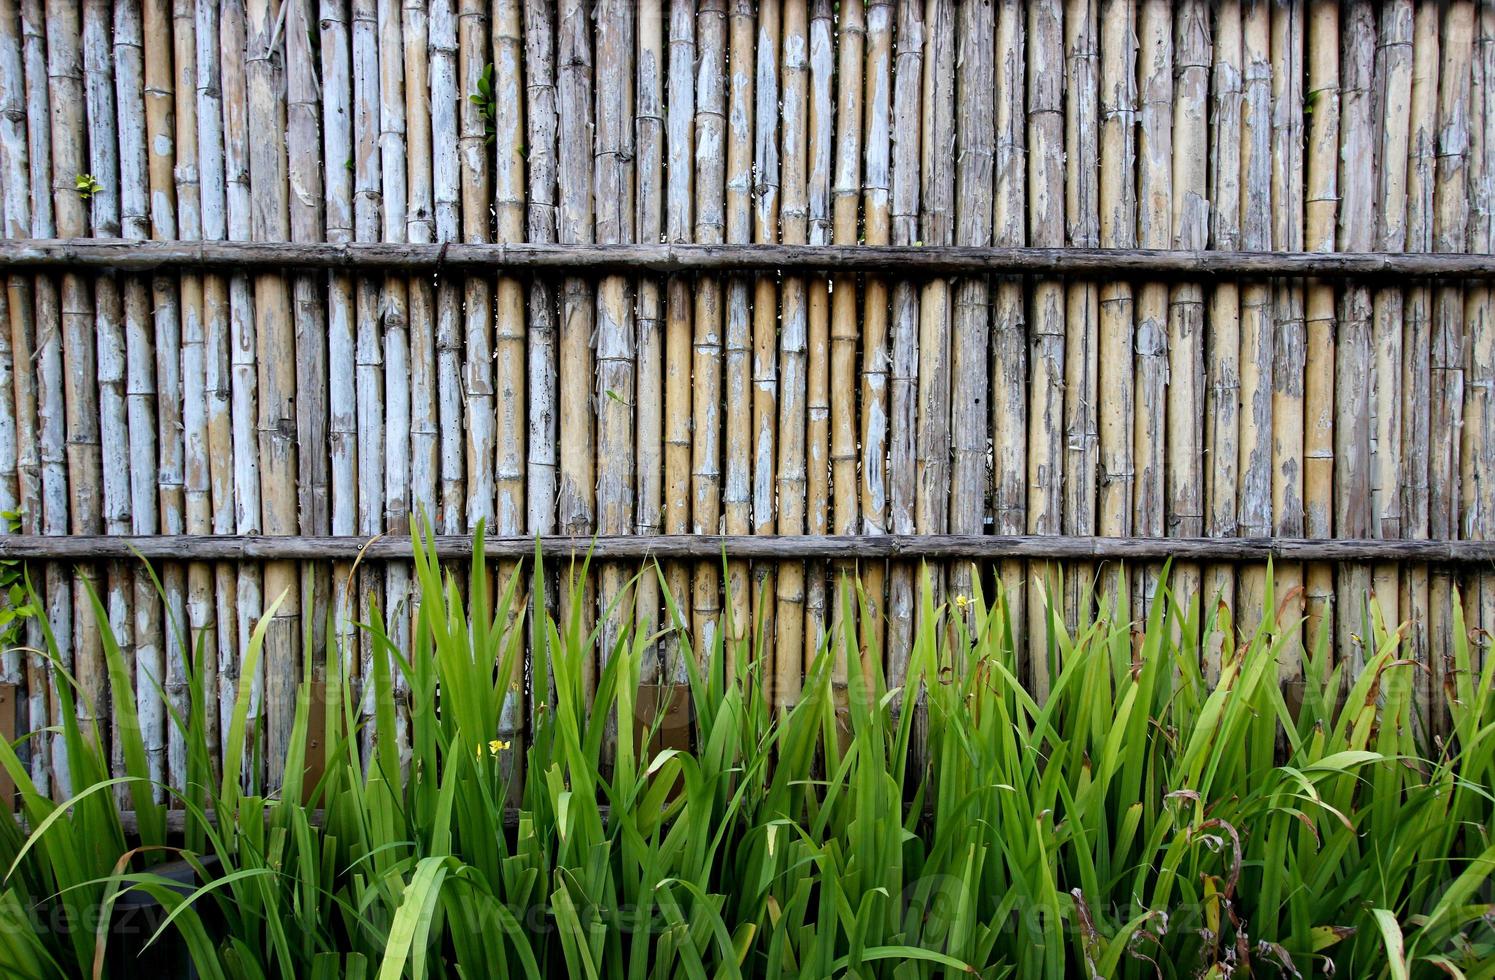 Bamboo wall with grass at the bottom photo